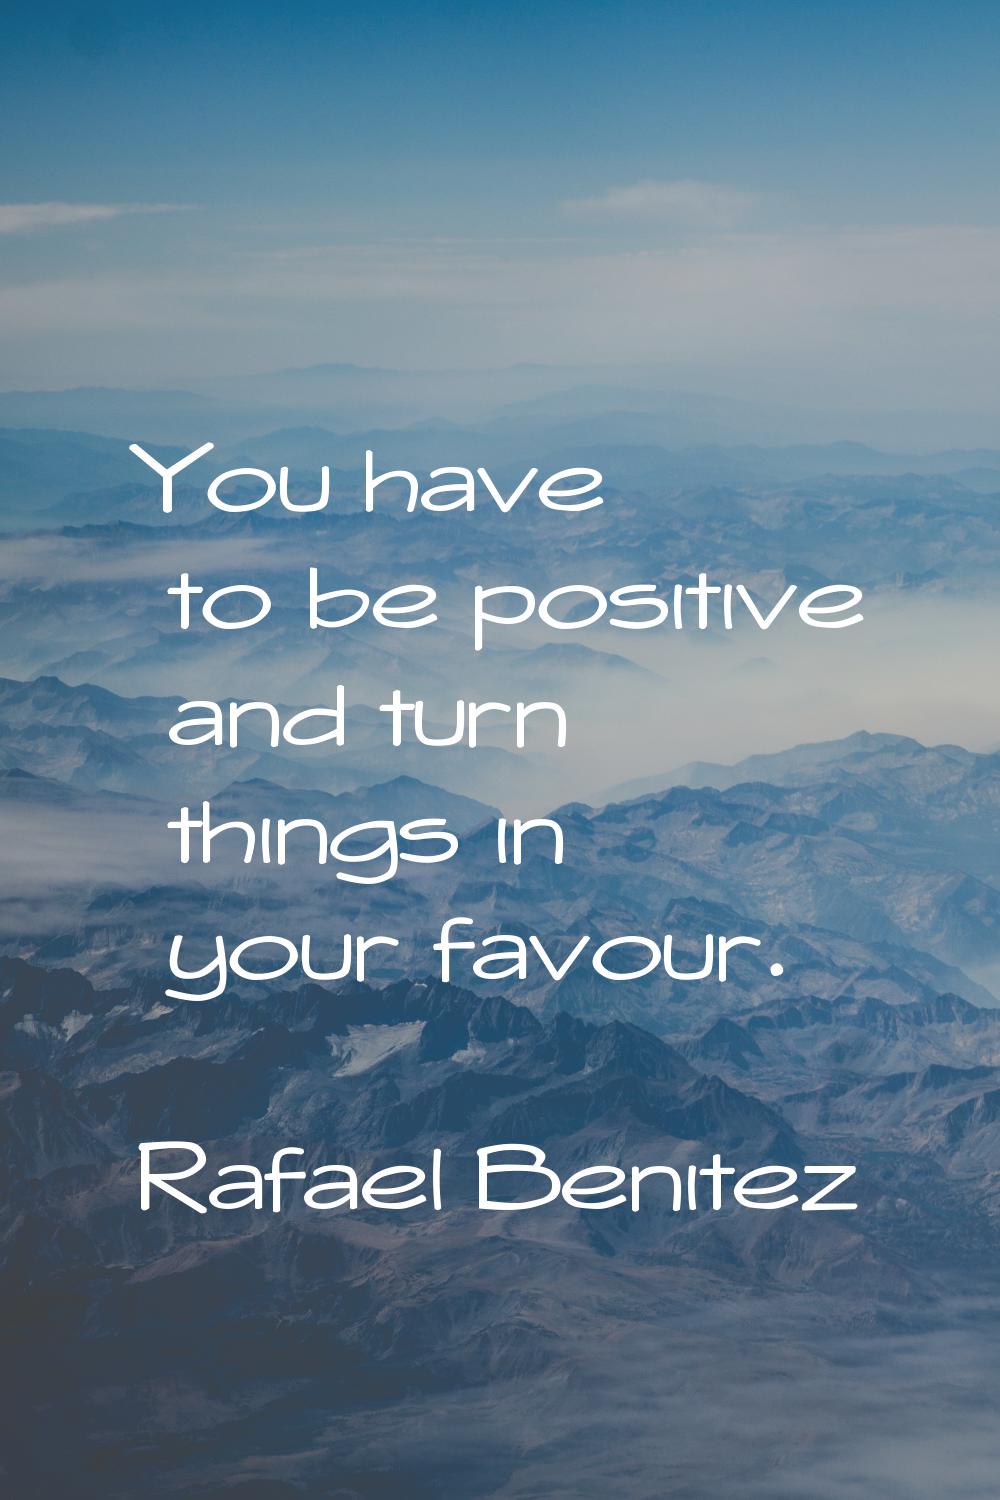 You have to be positive and turn things in your favour.